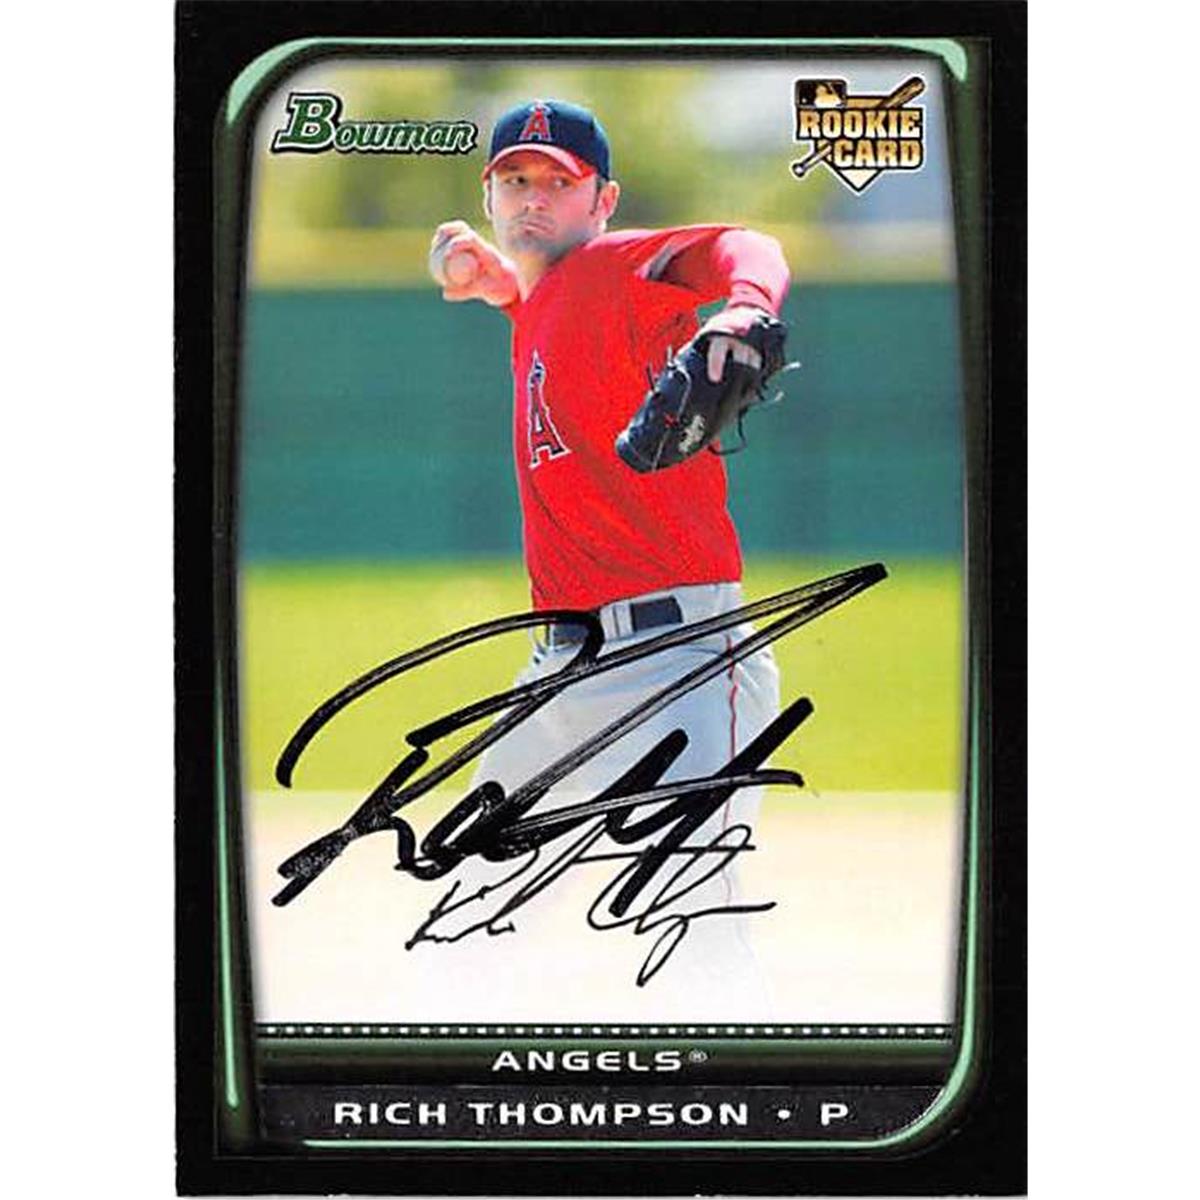 Picture of Autograph Warehouse 366315 Rich Thompson Autographed Baseball Card - Anaheim Angels 2008 Topps Bowman No.BDP36 Rookie